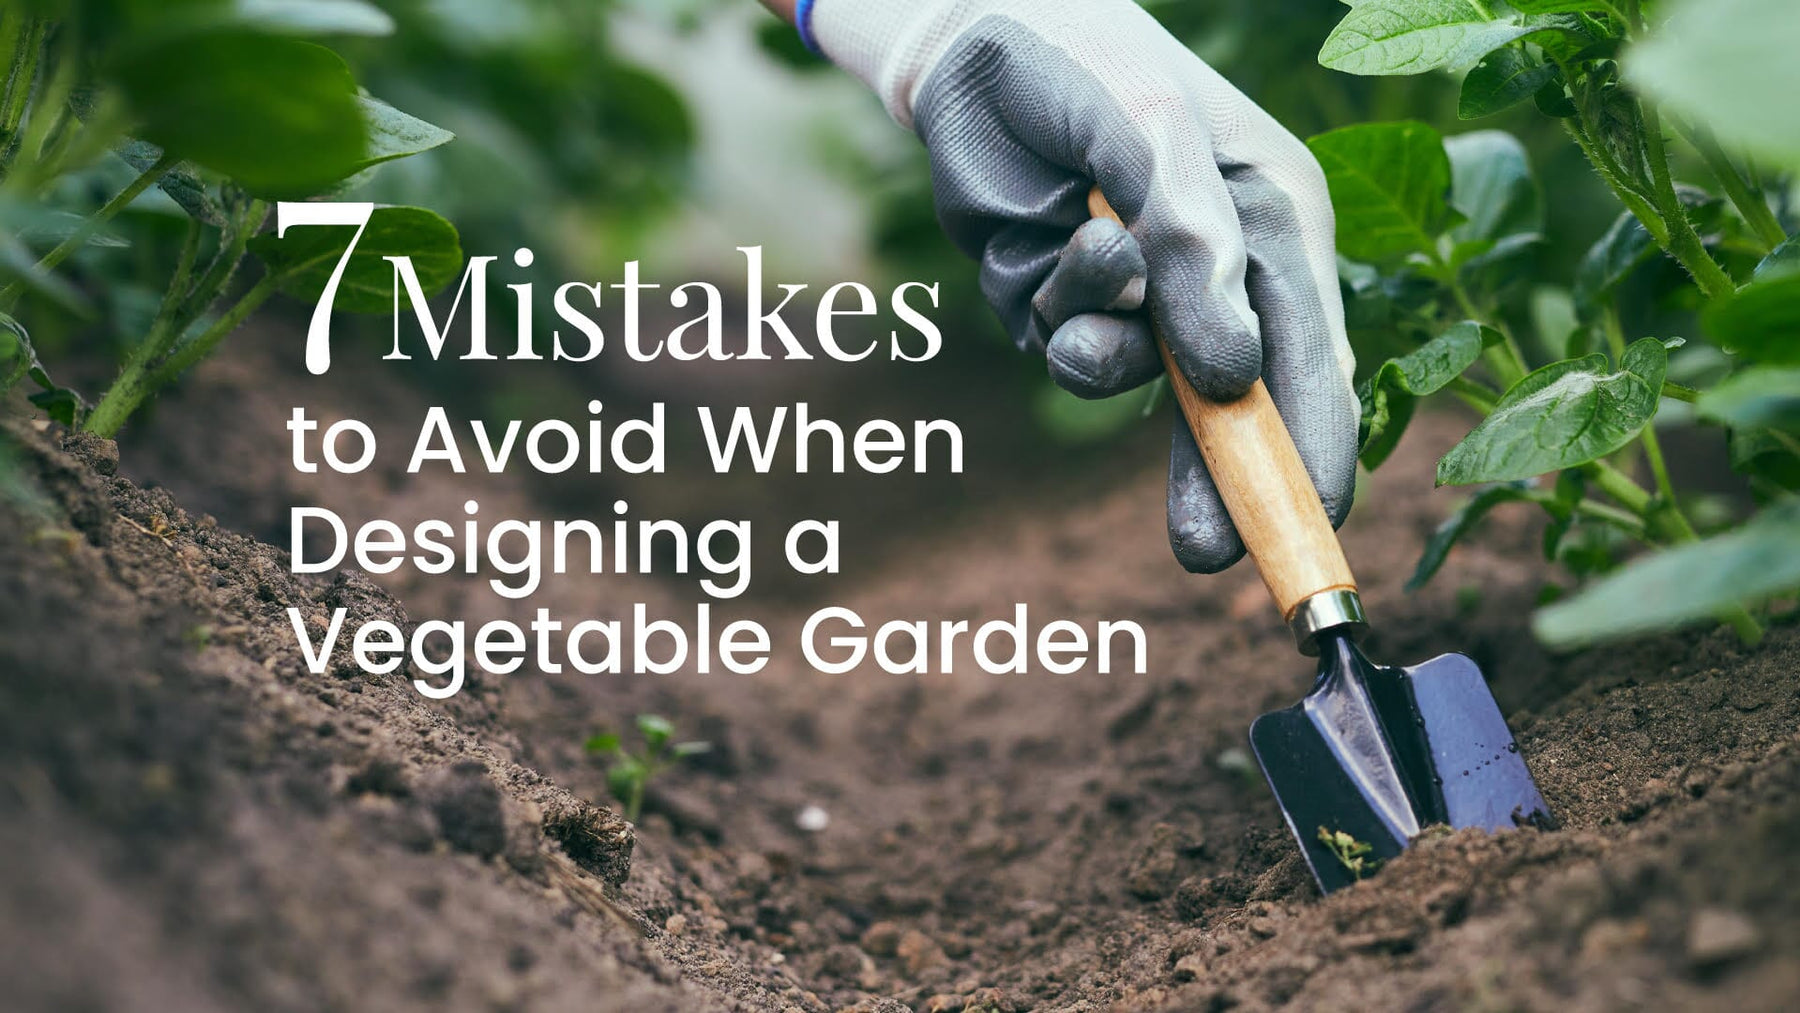 7 Mistakes to Avoid when Designing a Vegetable Garden